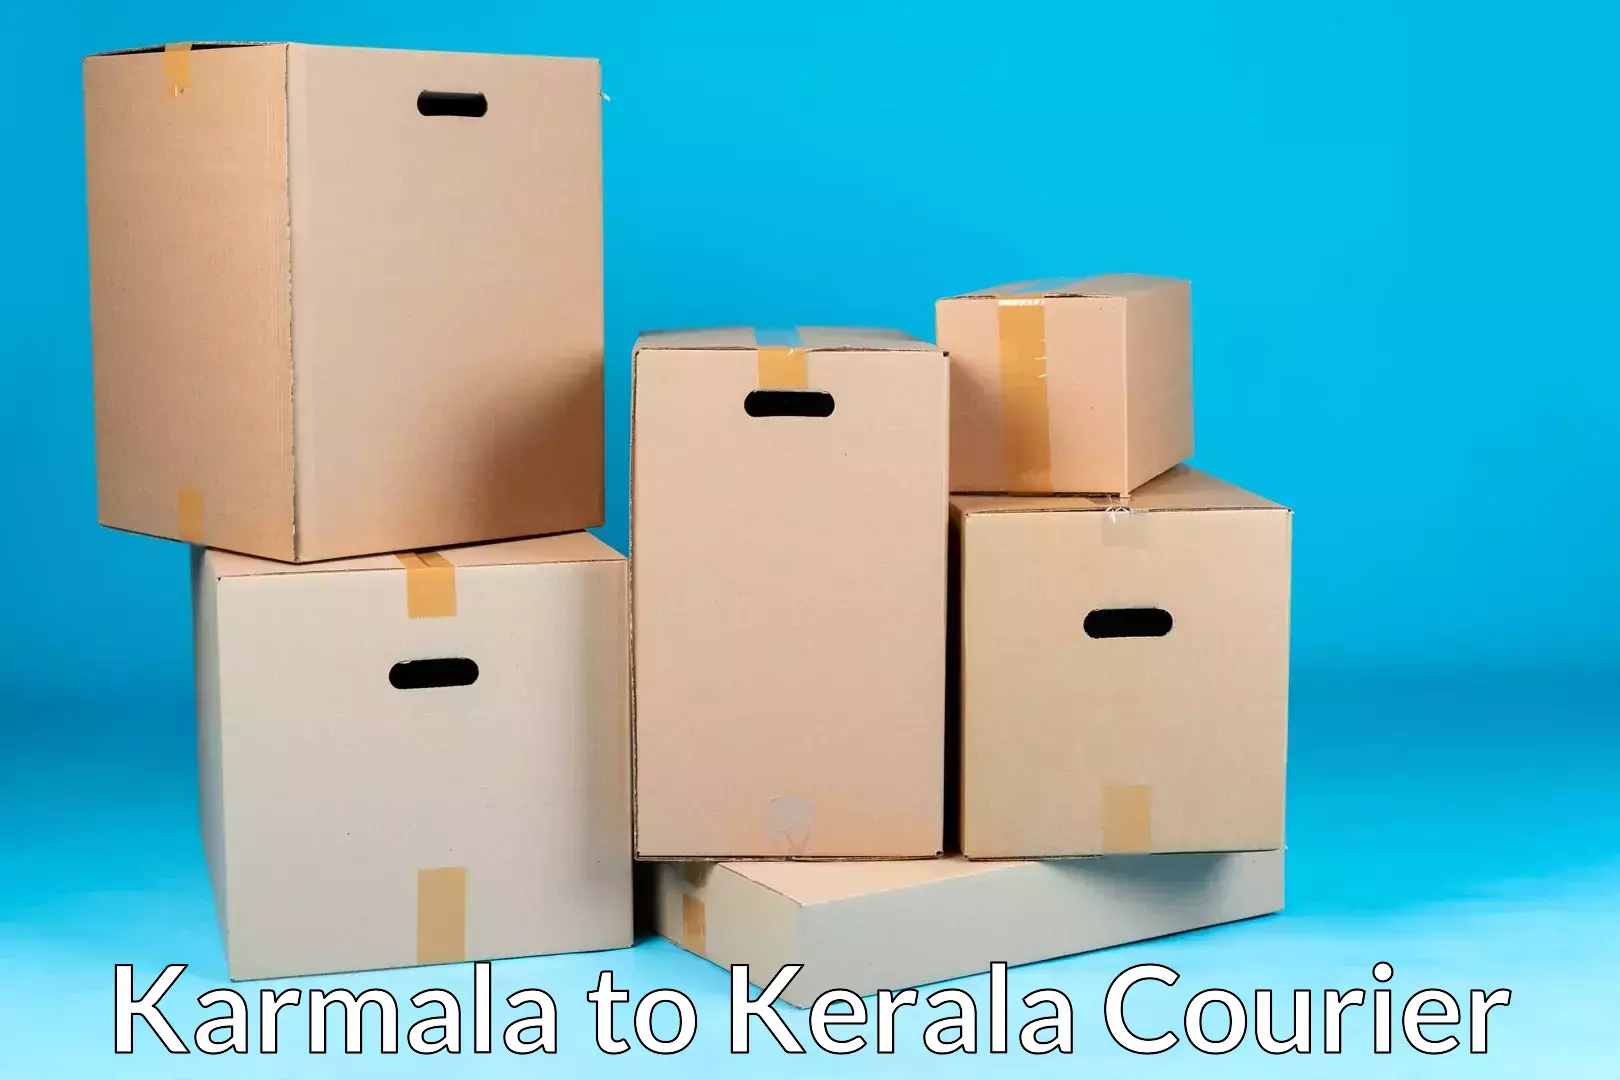 Expert goods movers in Karmala to Kannur